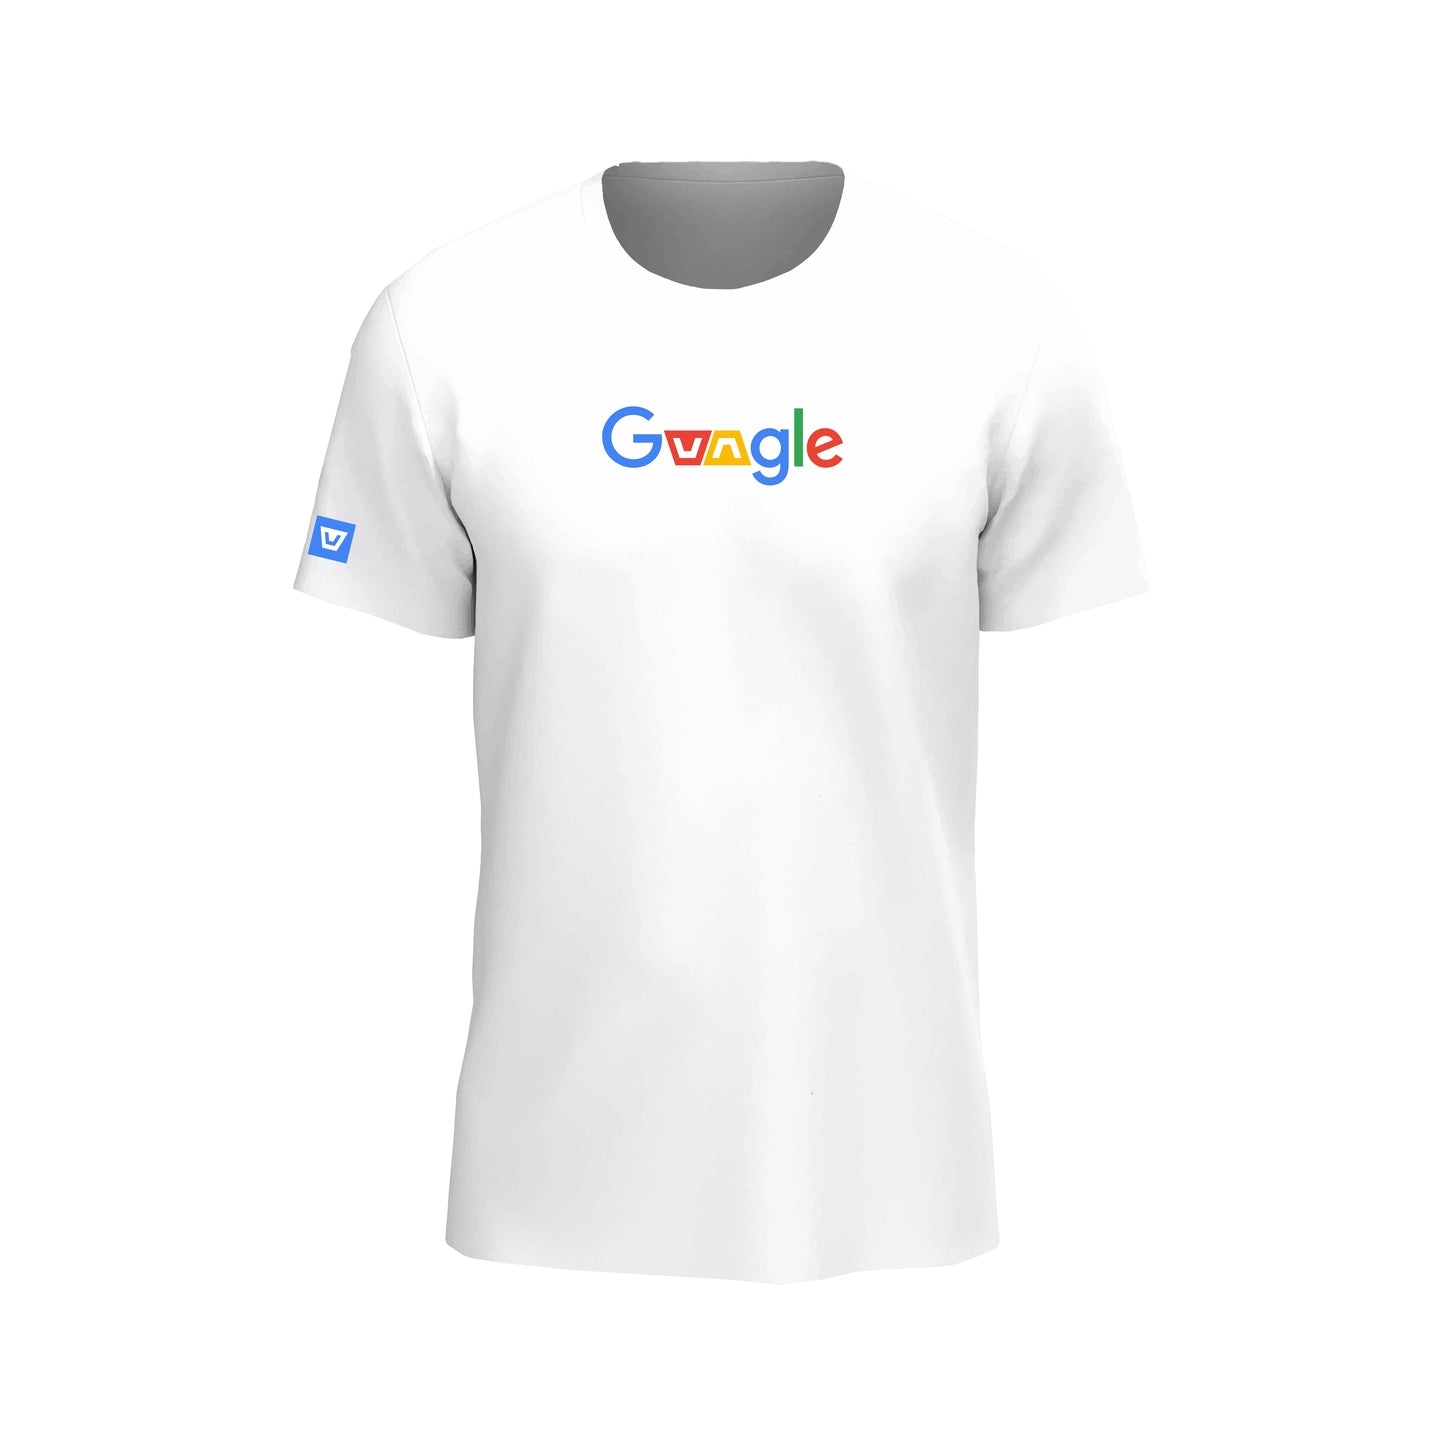 Google - Marine Force ® T-Shirt by Athletic Forces -  Model 3